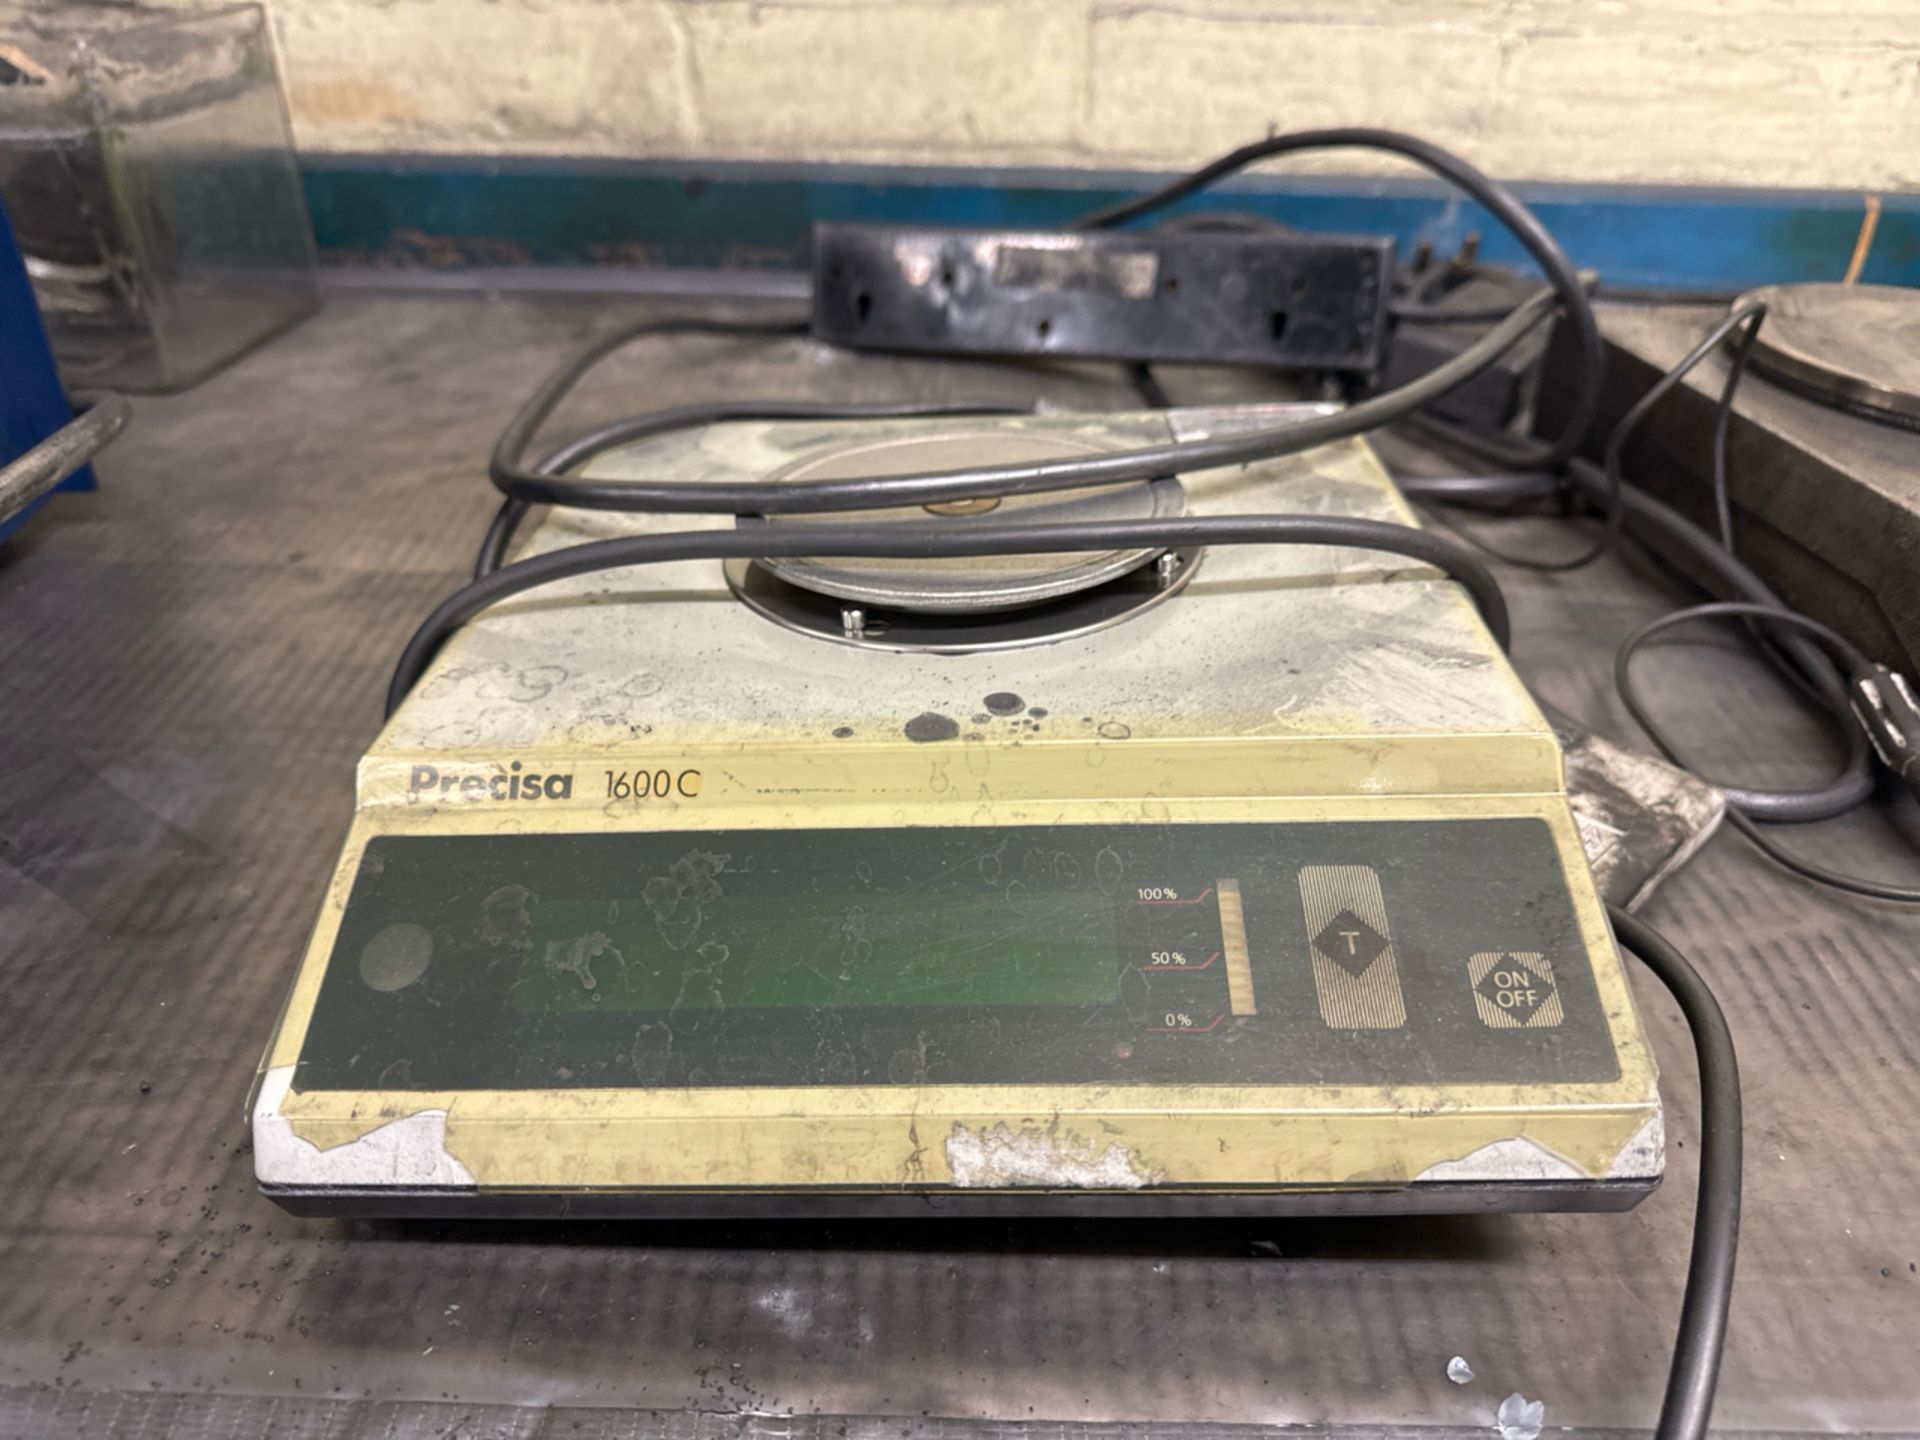 Precisa 1600C Weighing Scales - Image 2 of 3